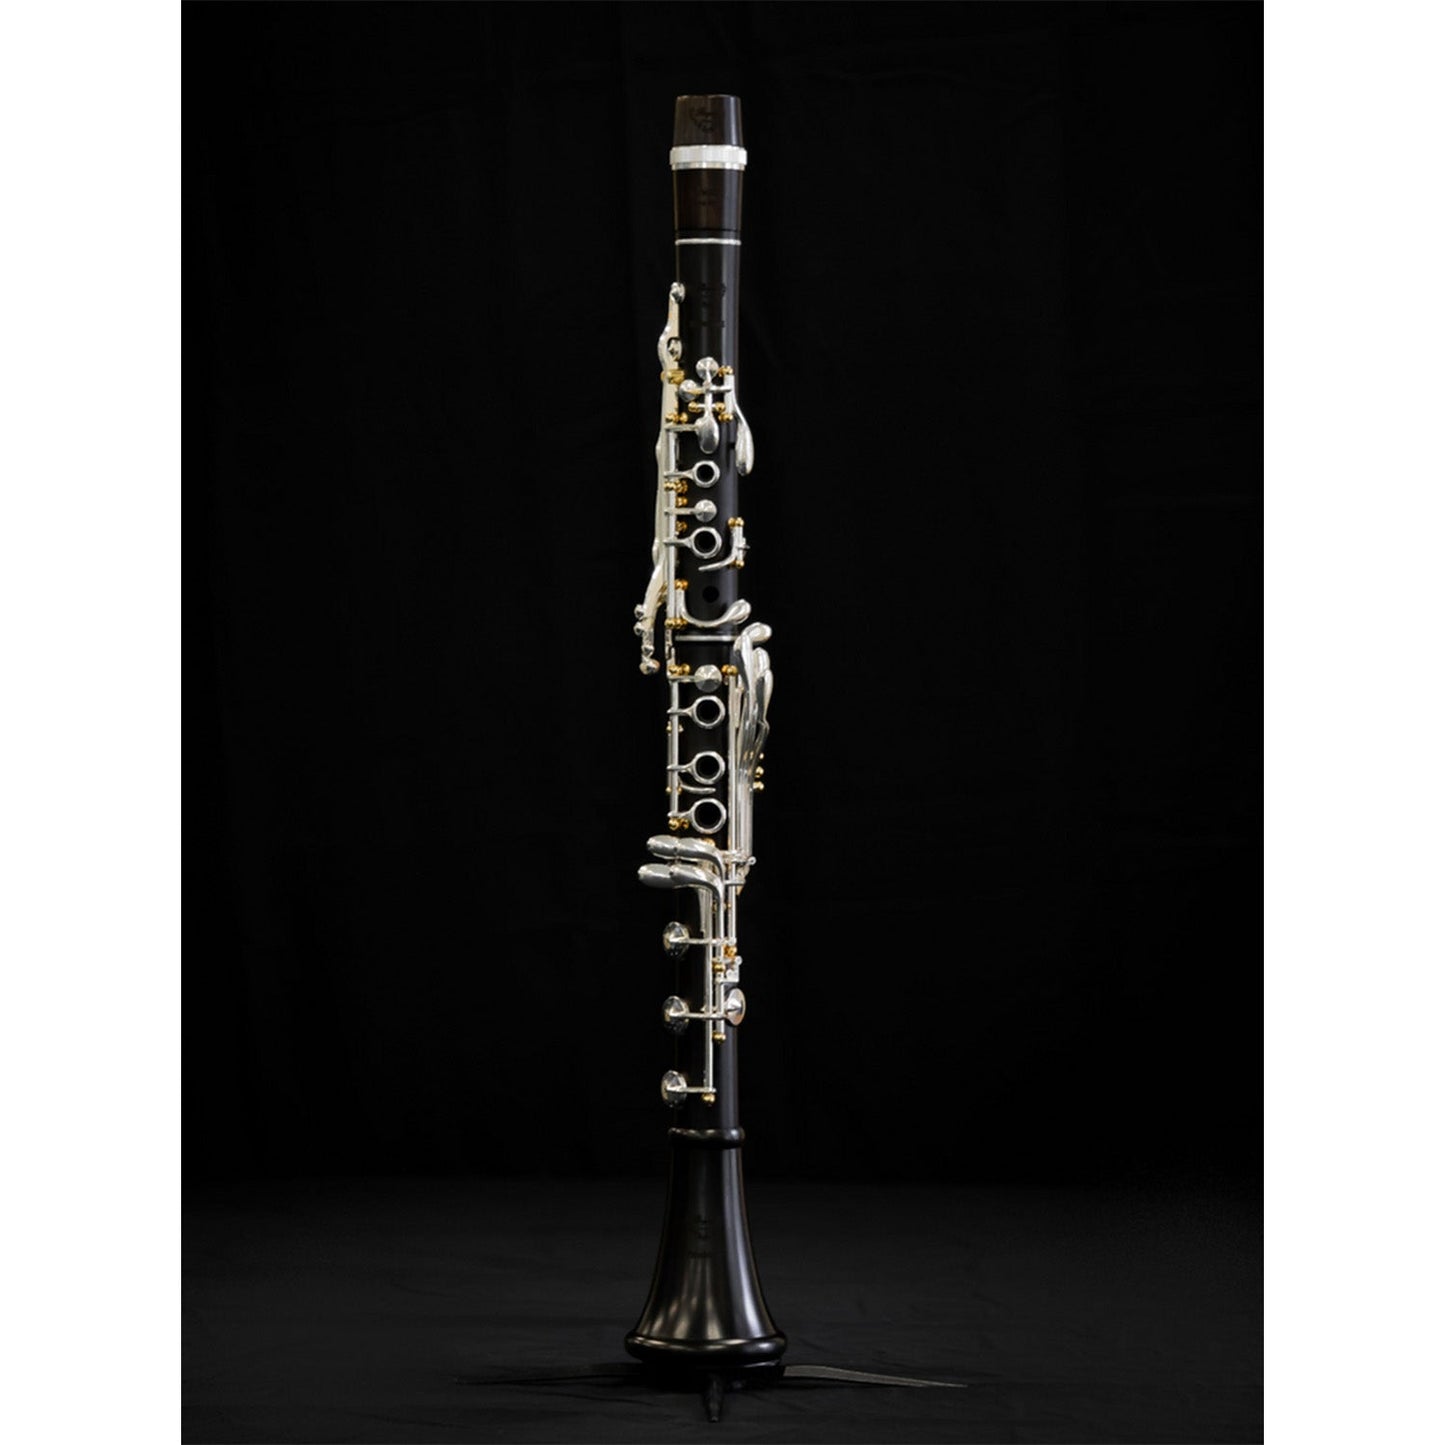 full length shot of the Royal Global Firebird clarinet assembled on a clarinet stand, against a black background